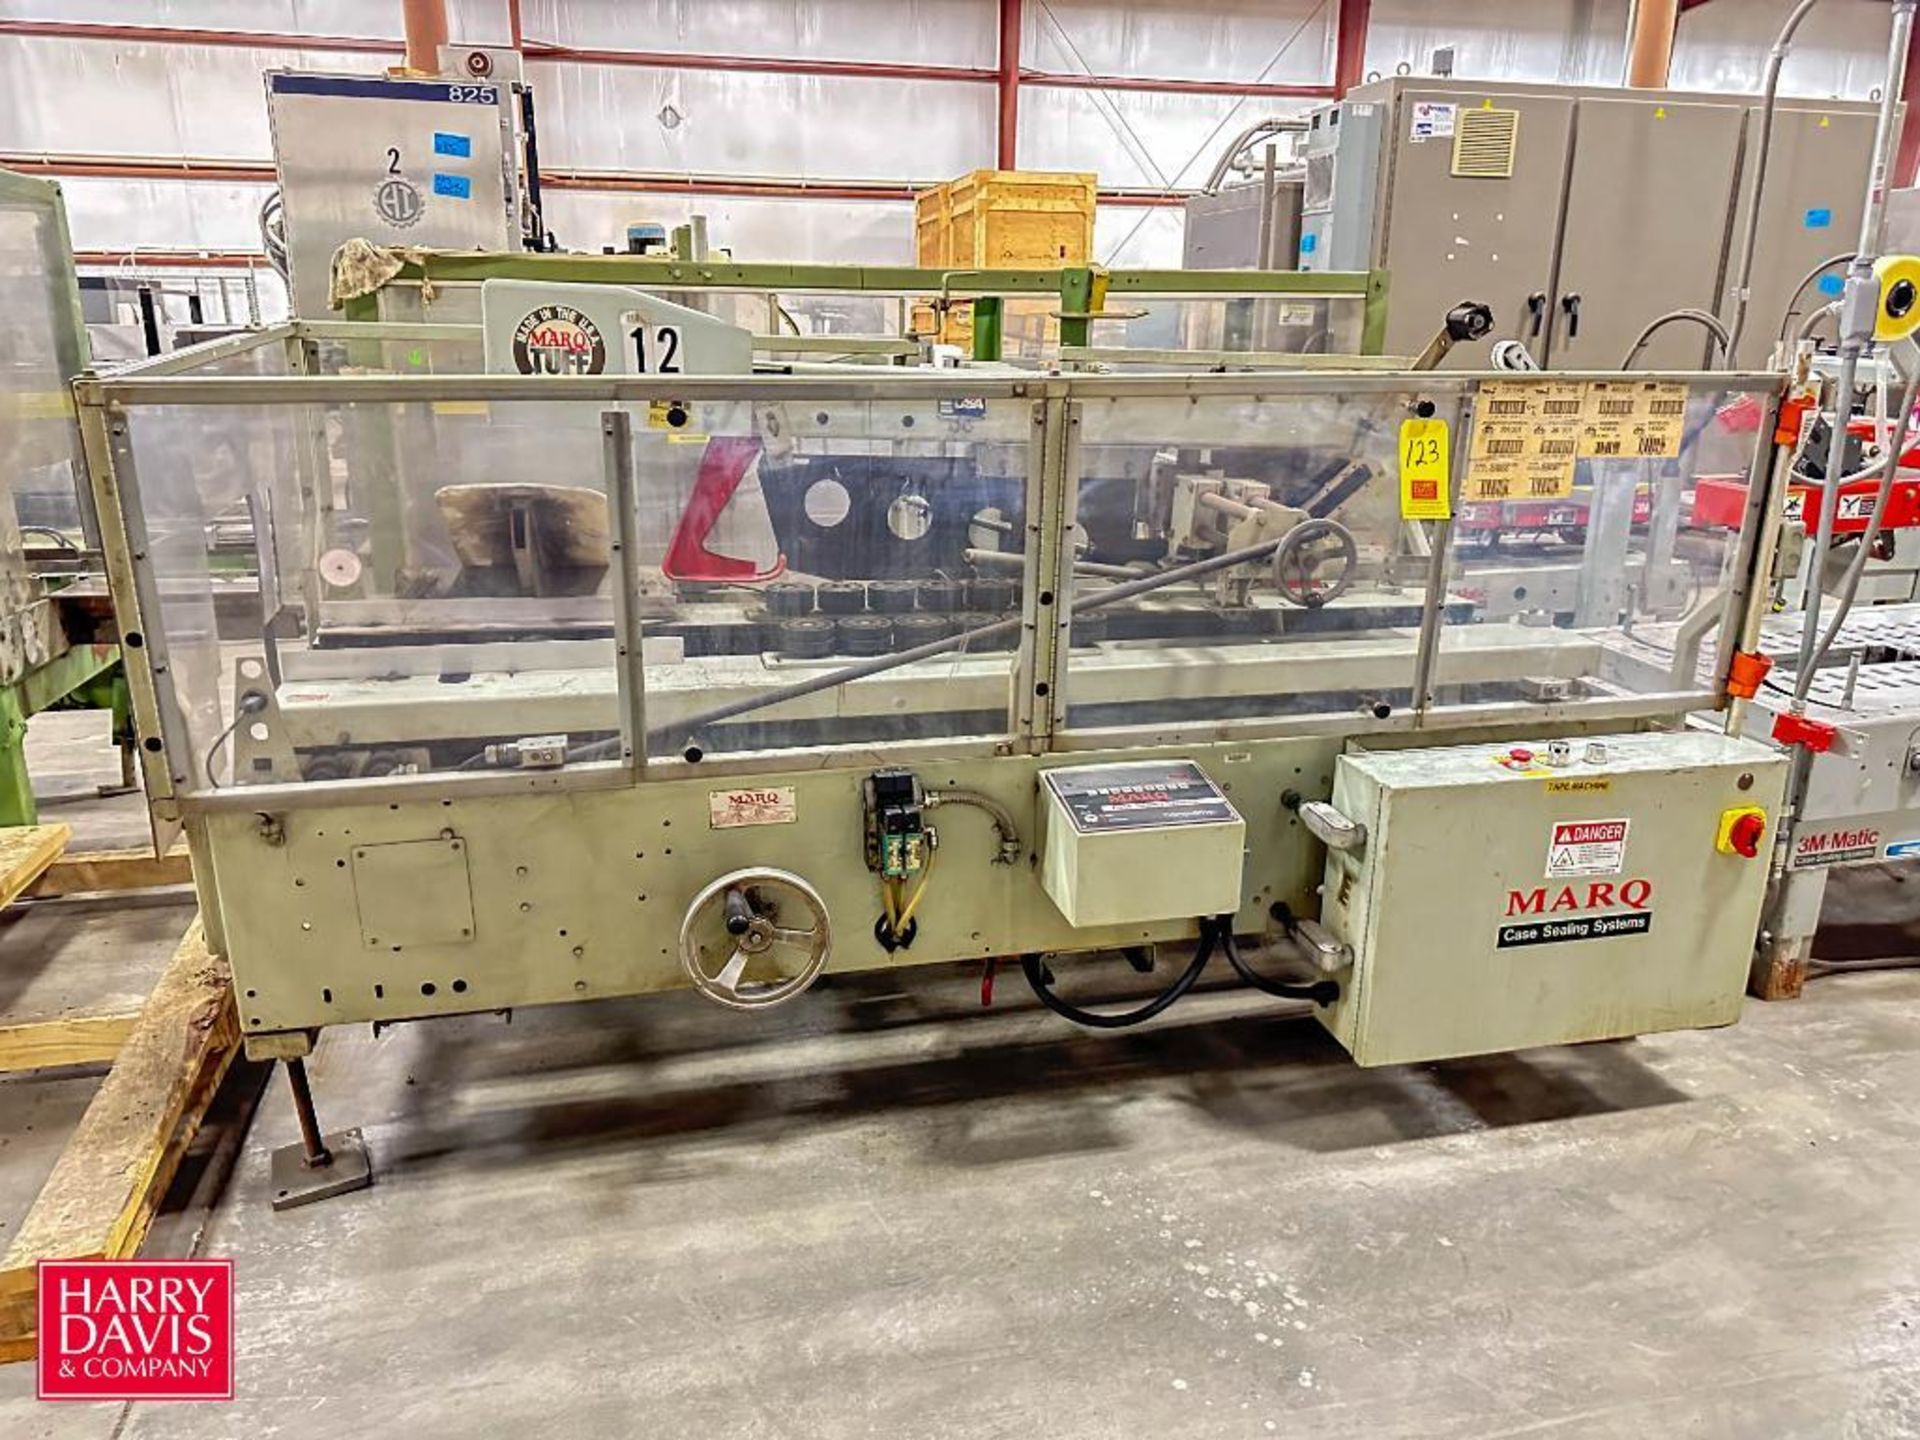 MARQ Top and Bottom Case Sealer, Model: HPA-SLO/RH/C, S/N: Q6039 - Rigging Fee: $300